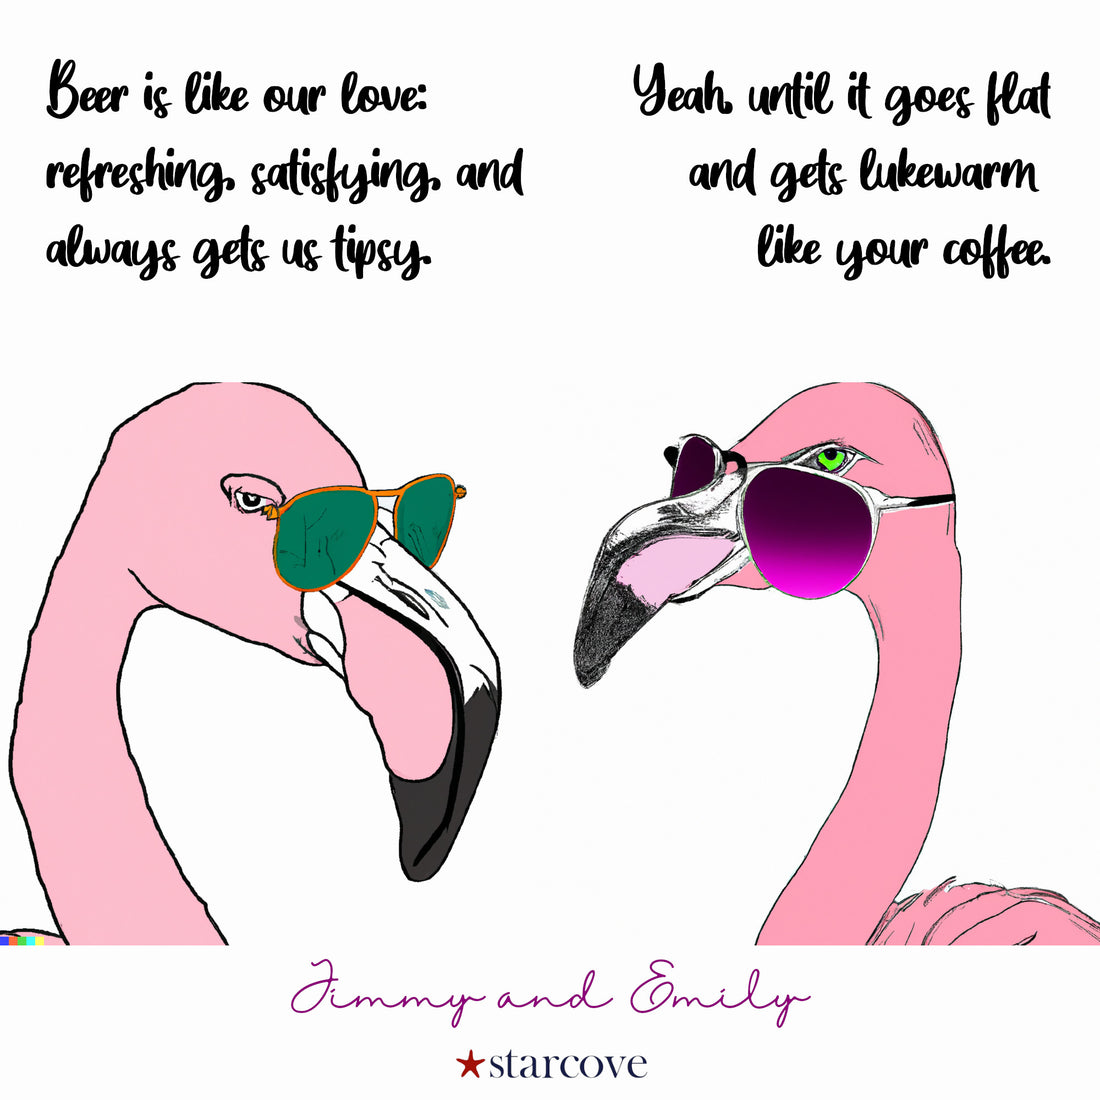 Get Ready to Laugh: Meet Emily and Jimmy, the Hilarious Flamingo Couple of Our New Couples Humor Comic Series